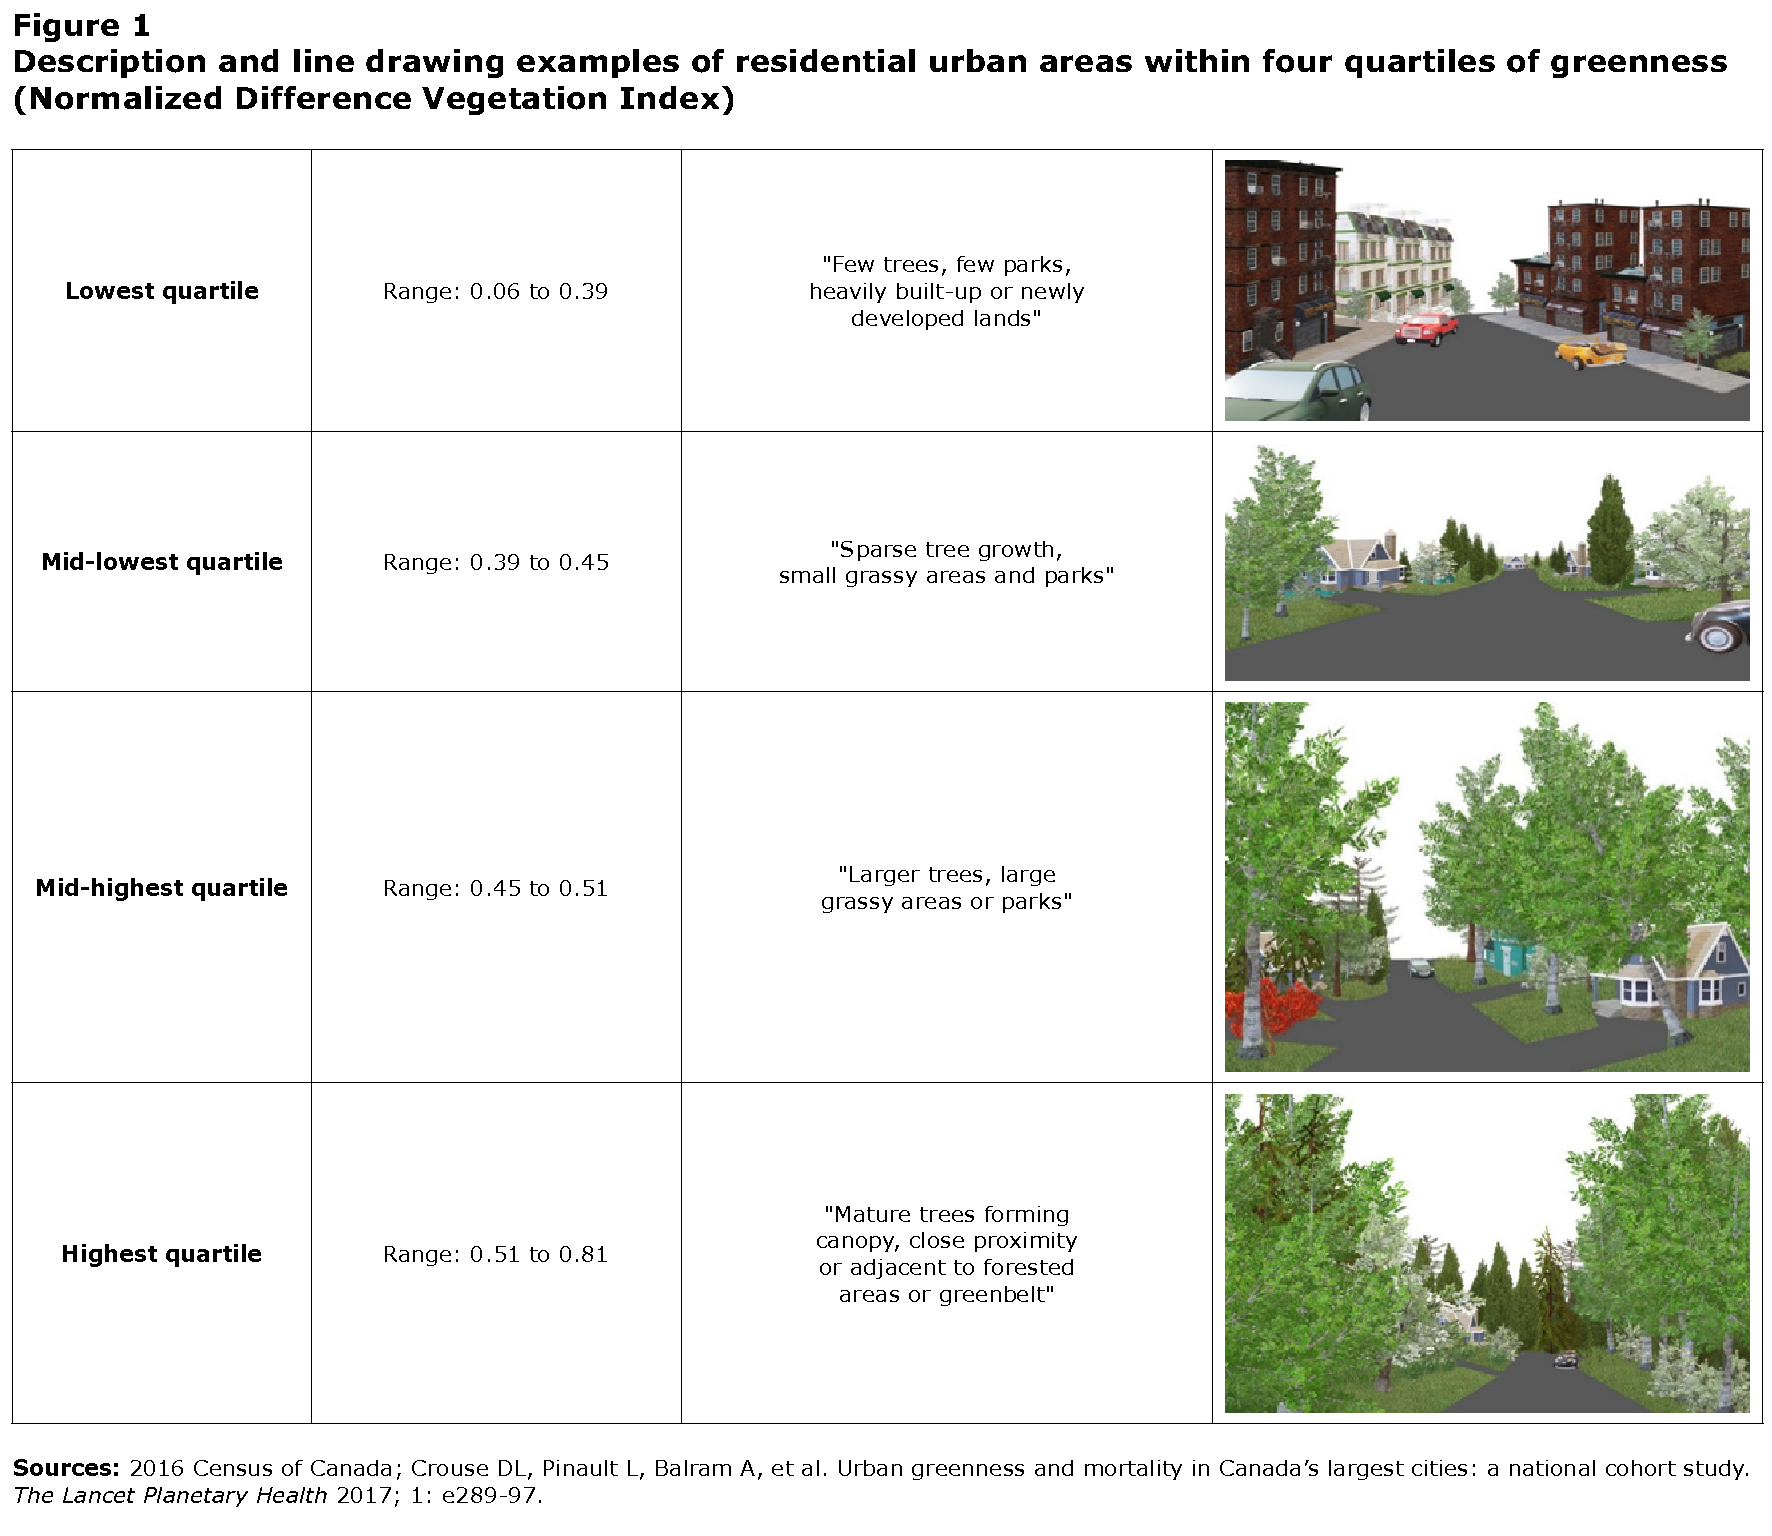 Figure 1 Description and line drawing examples of residential urban areas within four quartiles of greenness (Normalized Difference Vegetation Index)